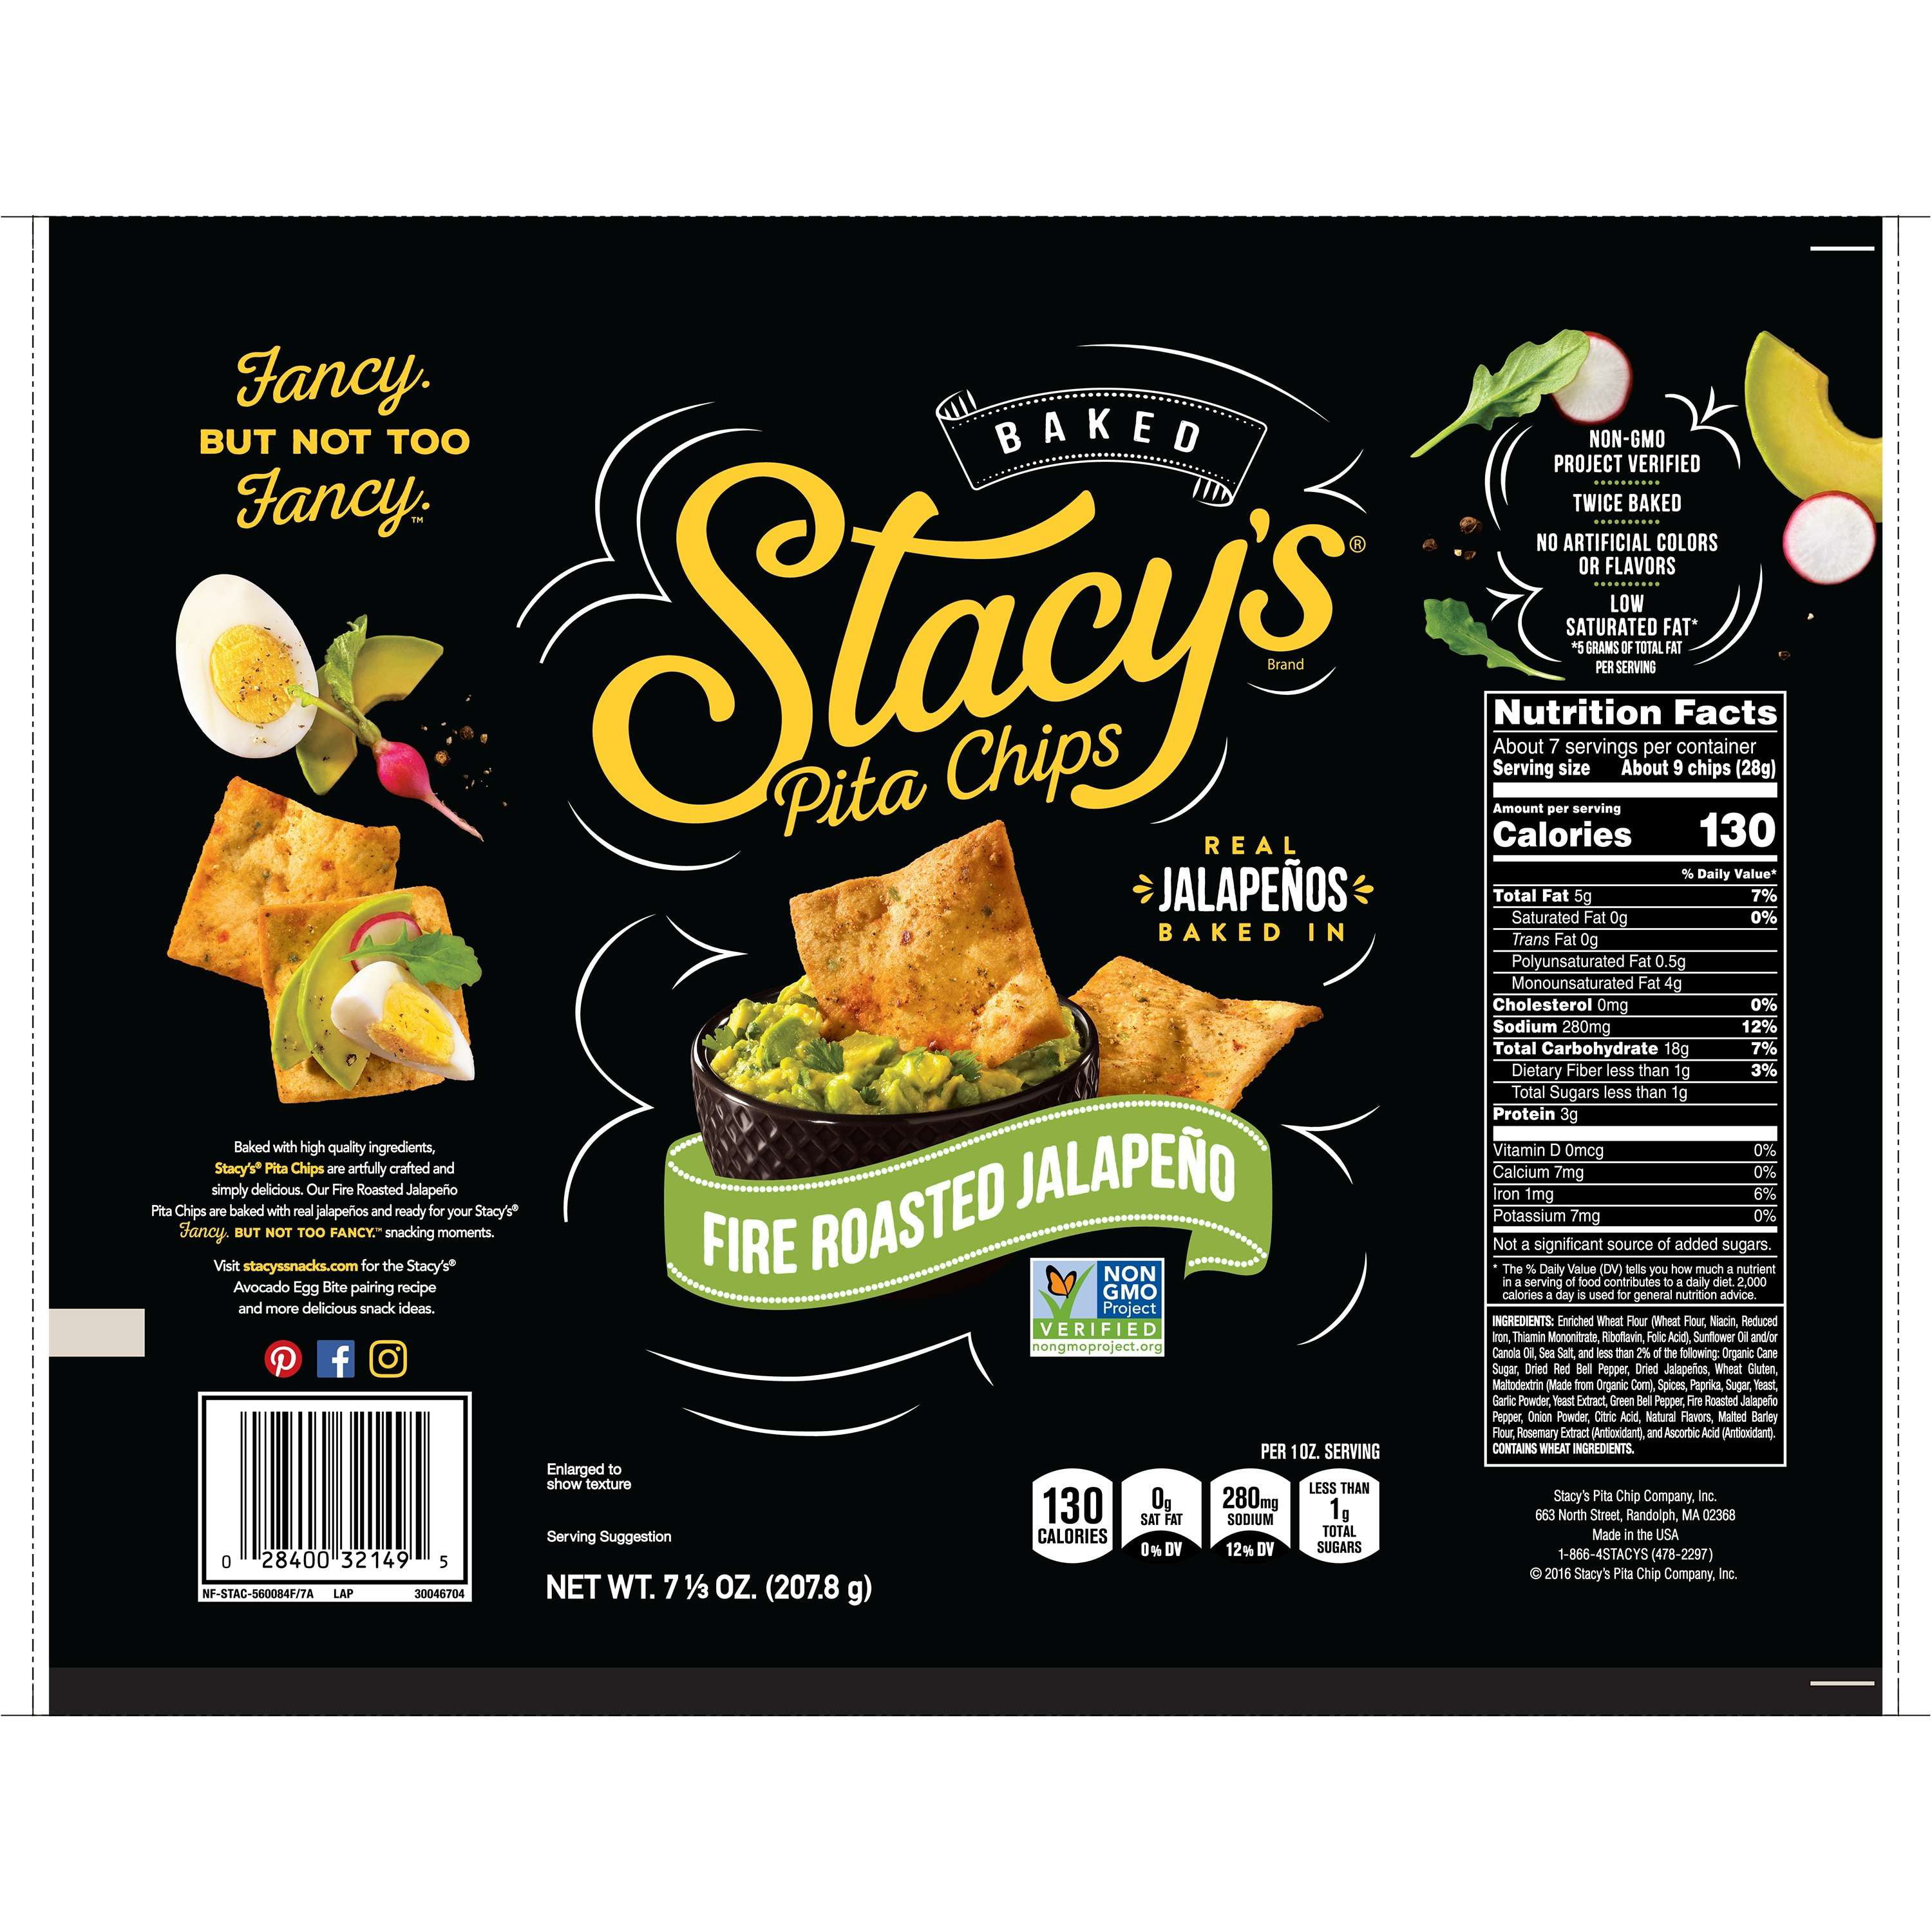 Amazon Offer: 24 Count Stacys Pita Chips Variety Pack $7 